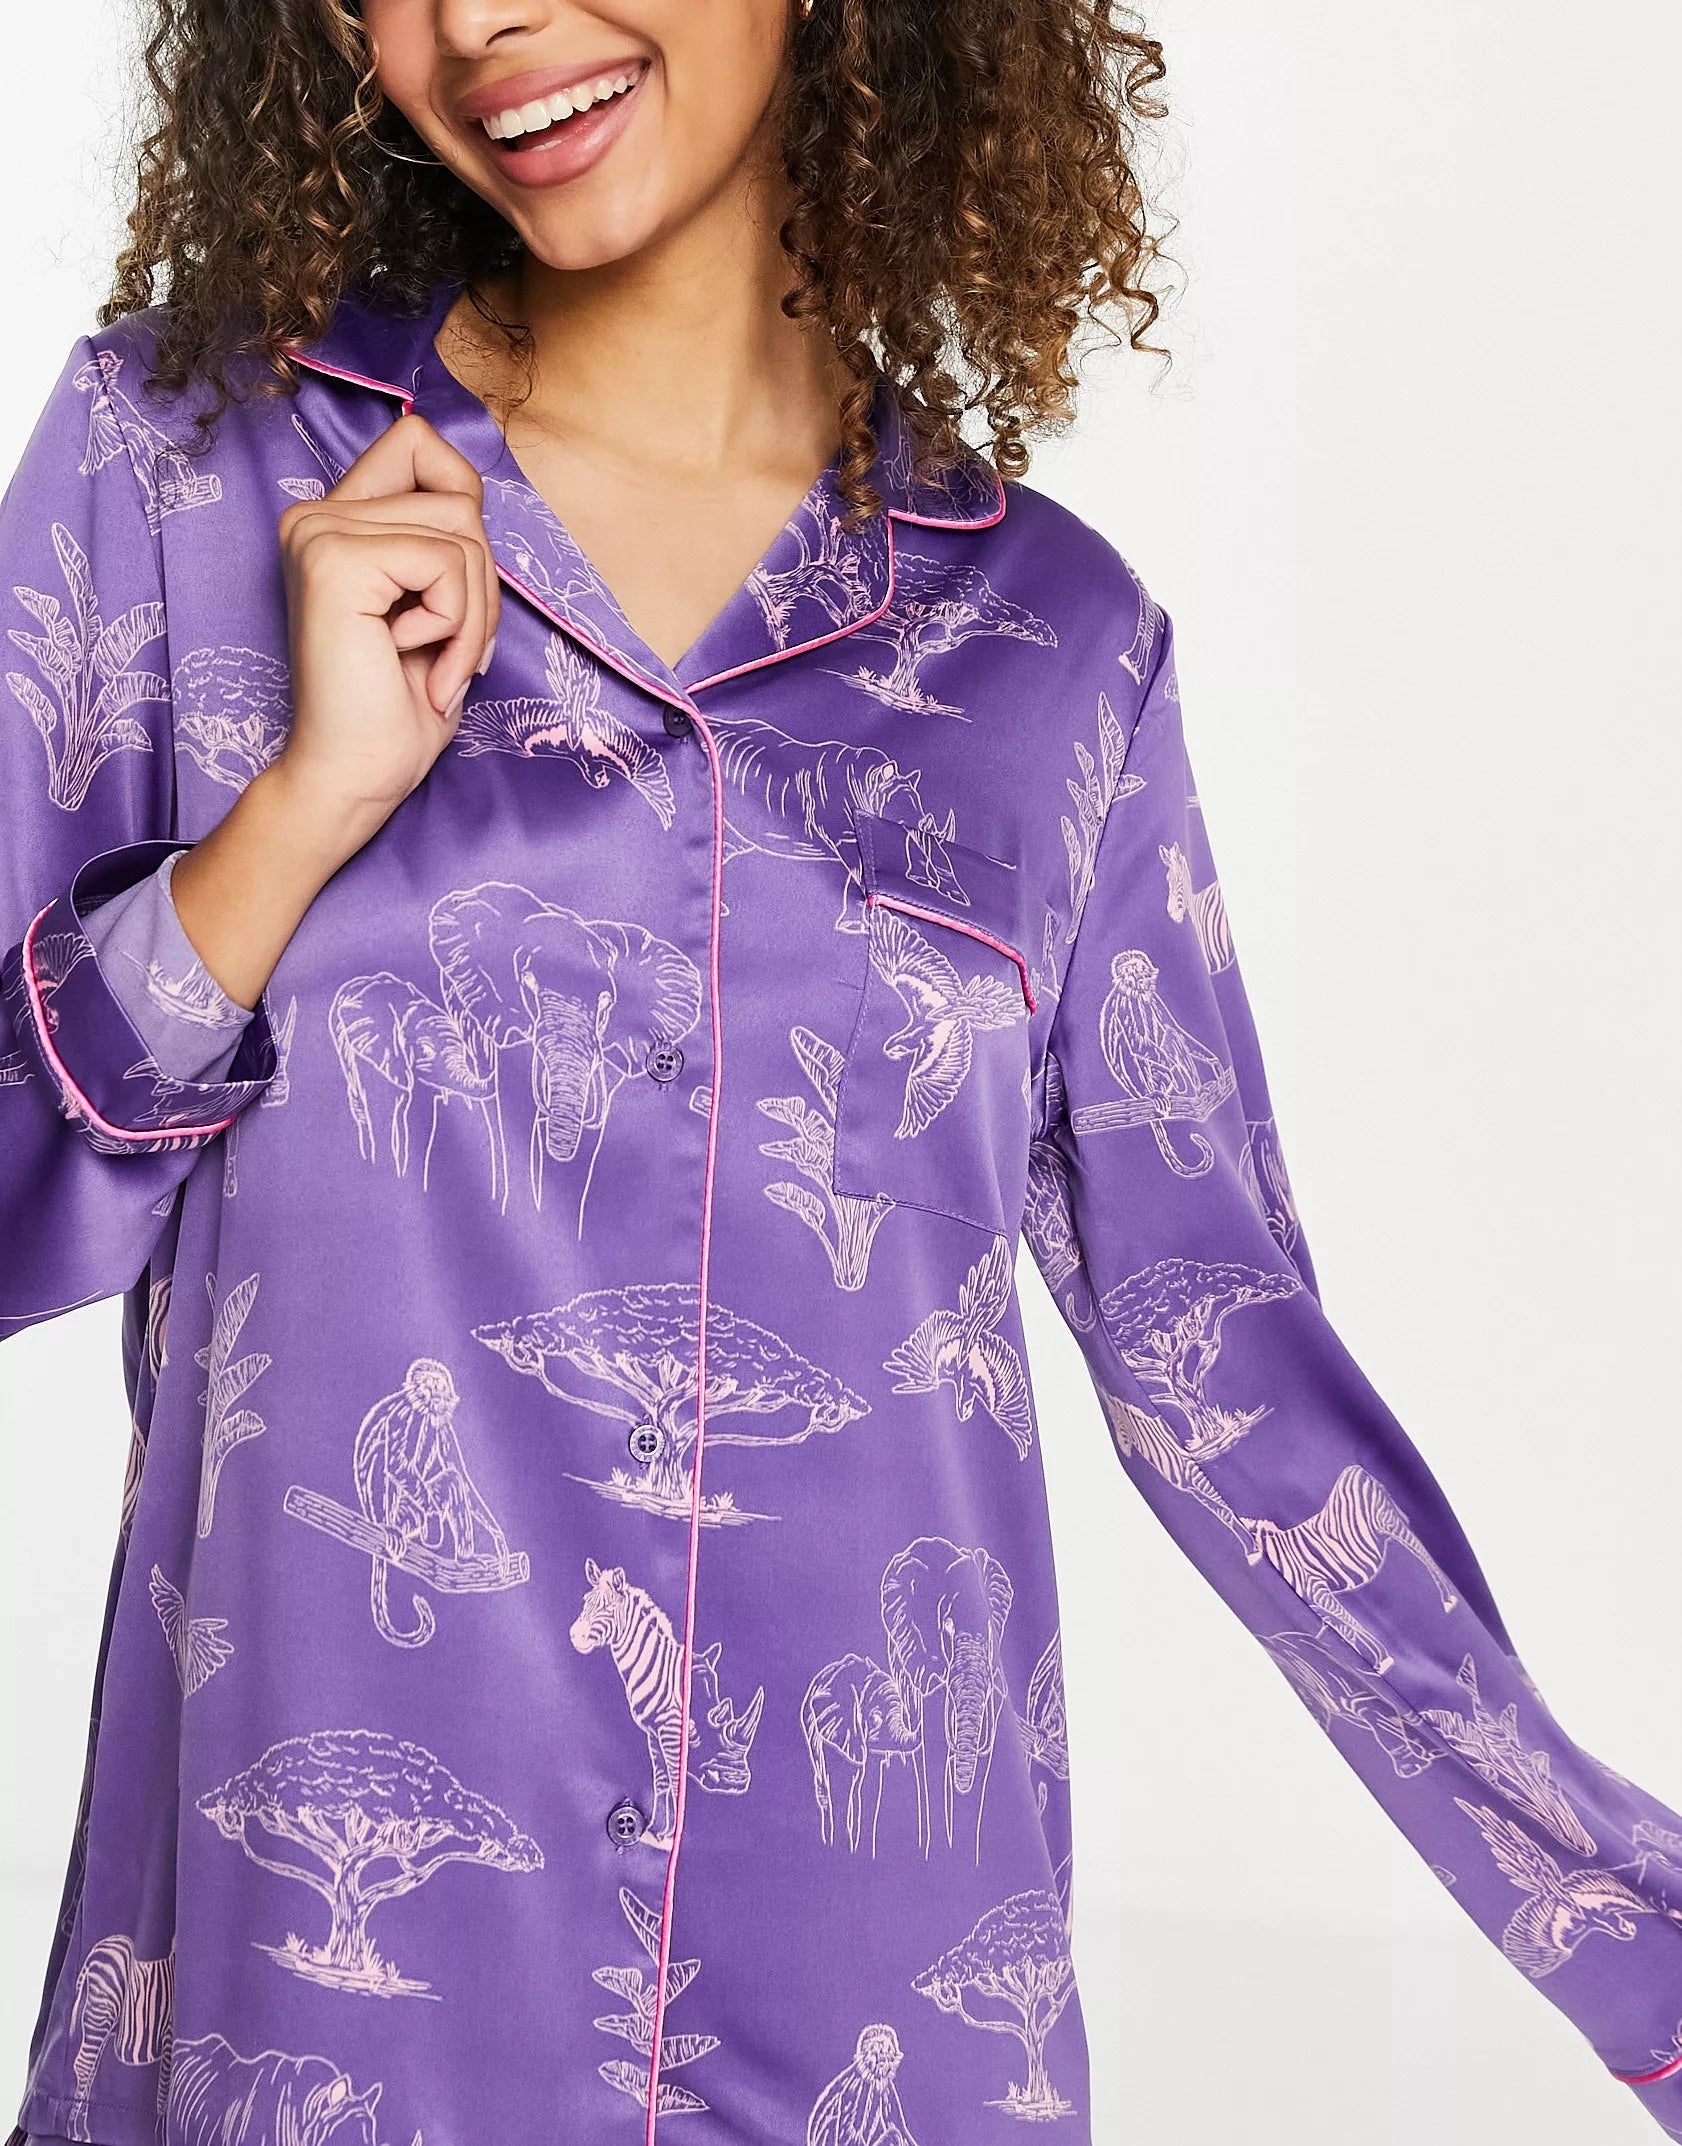 Purple Color Digital Abstract Printed loungewear/Nightsuit For Women With Pants.